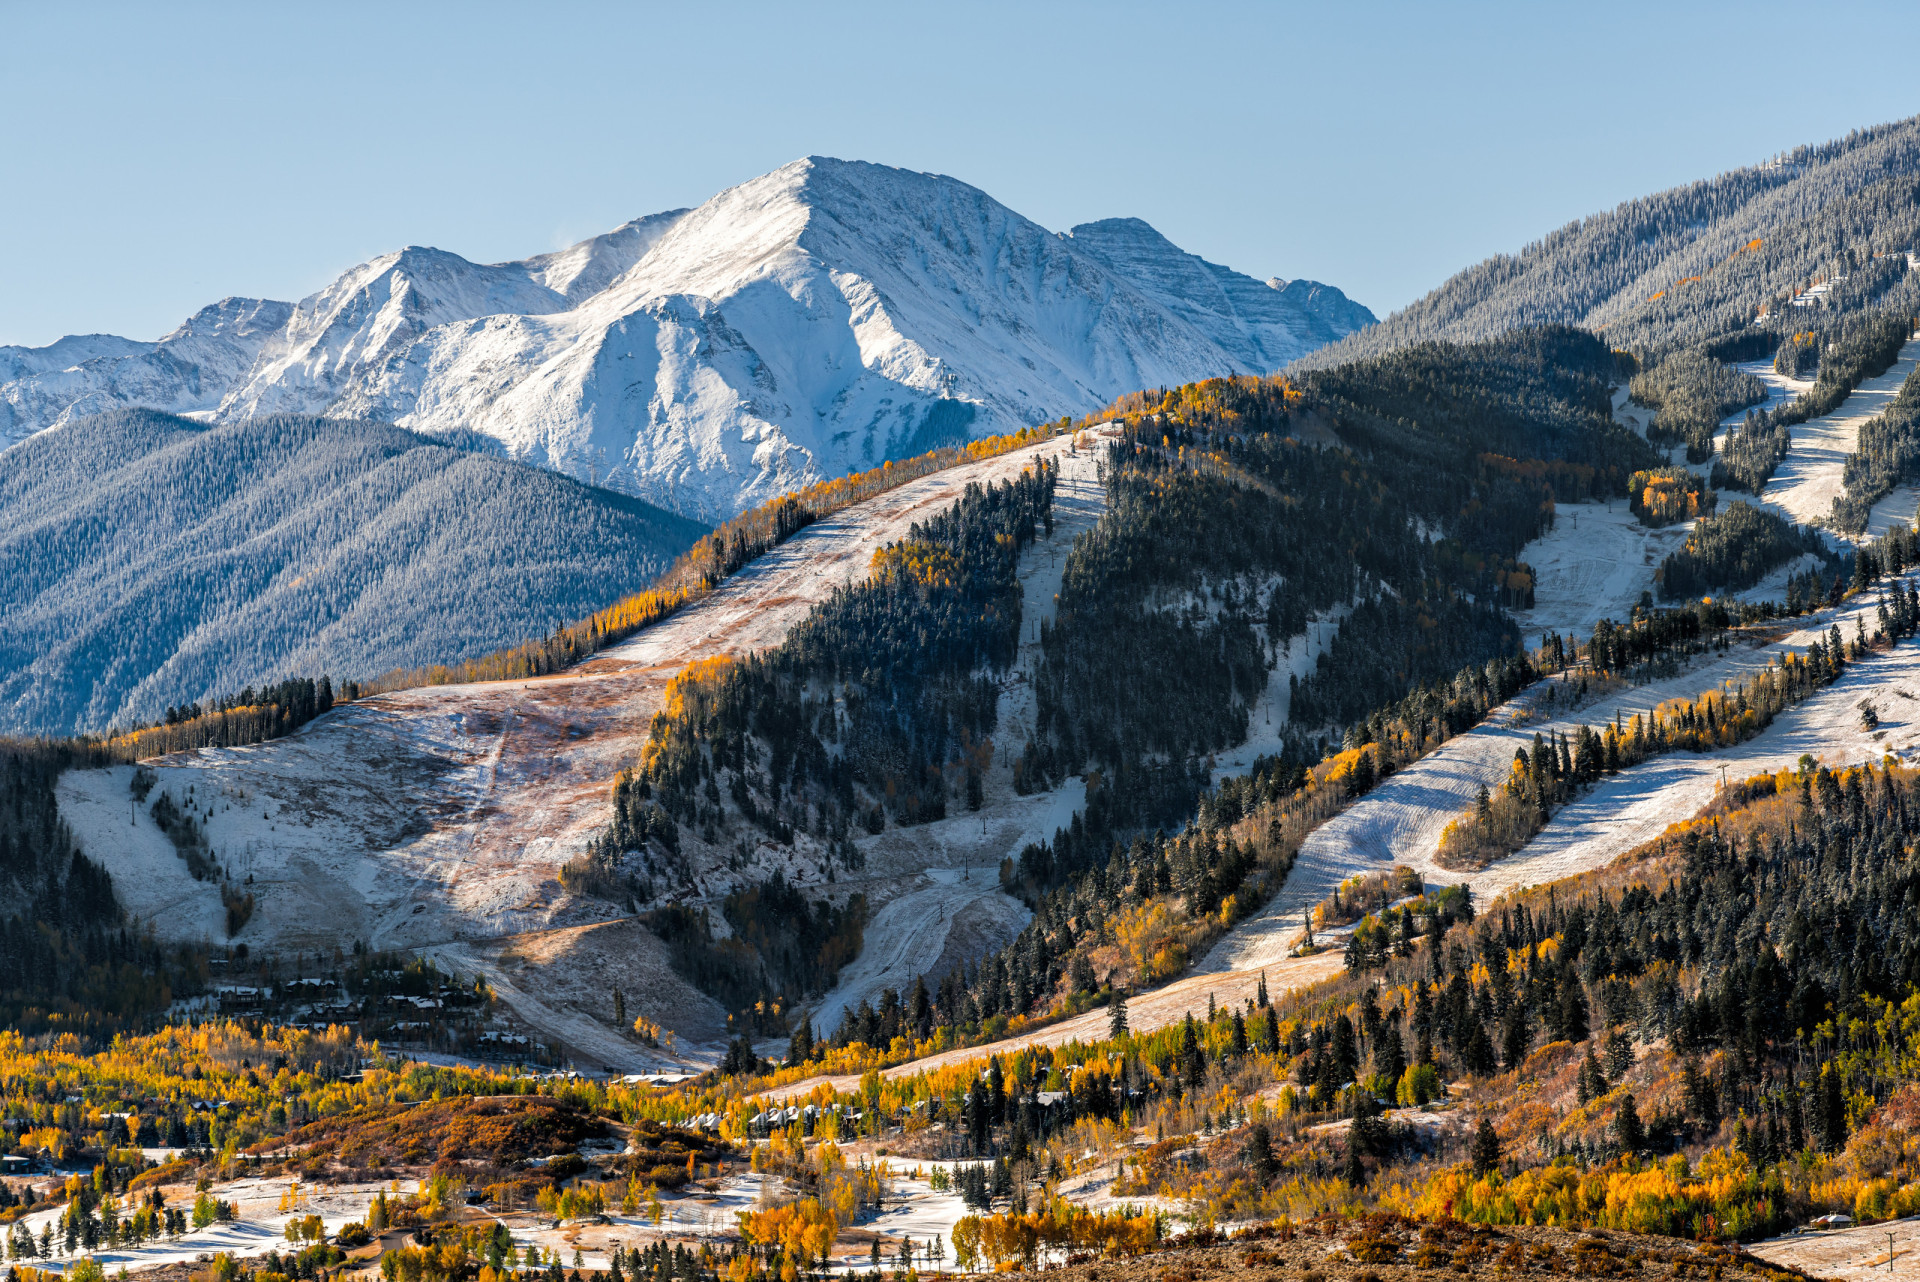 <p>Aspen, Colorado, needs little introduction. It's quite simply one of the most celebrated ski destinations in North America. Known for its high-altitude skiing, Aspen Mountain is as much about discovering nature as negotiating its network of steep, sidewinding runs.</p>